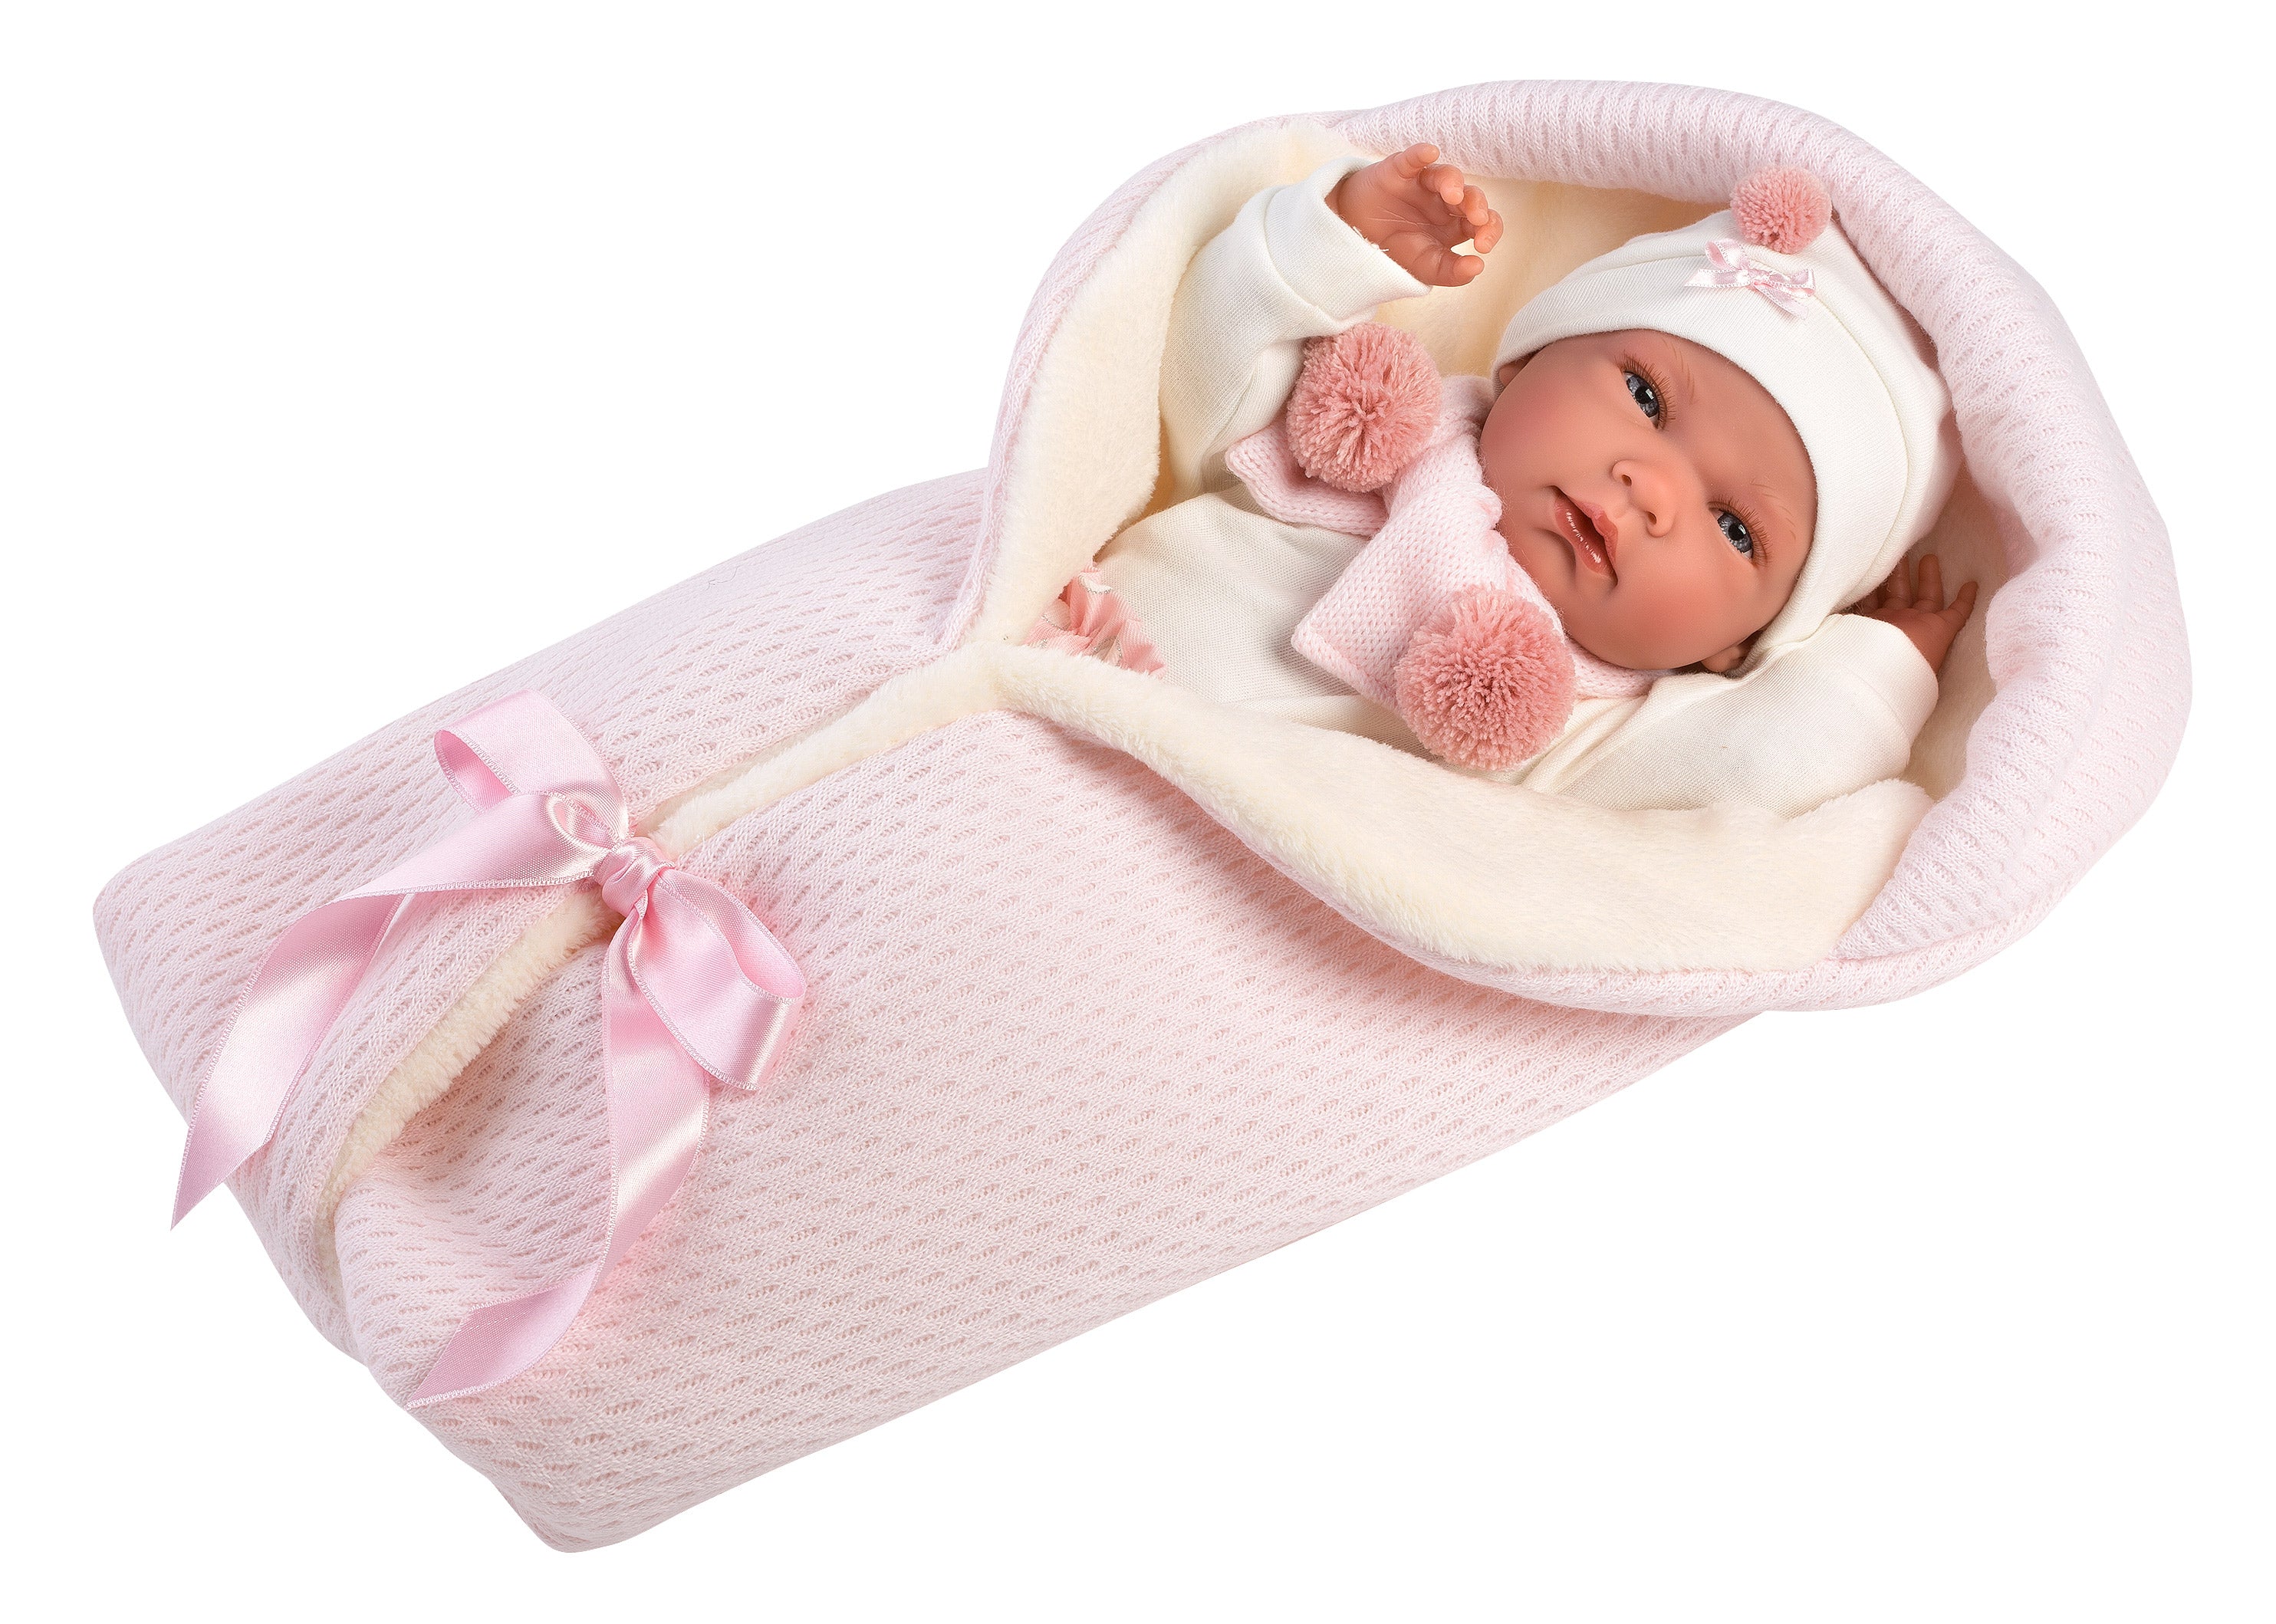 Llorens 15.7" Anatomically-correct Baby Doll Lydia With Swaddle Blanket Dolls